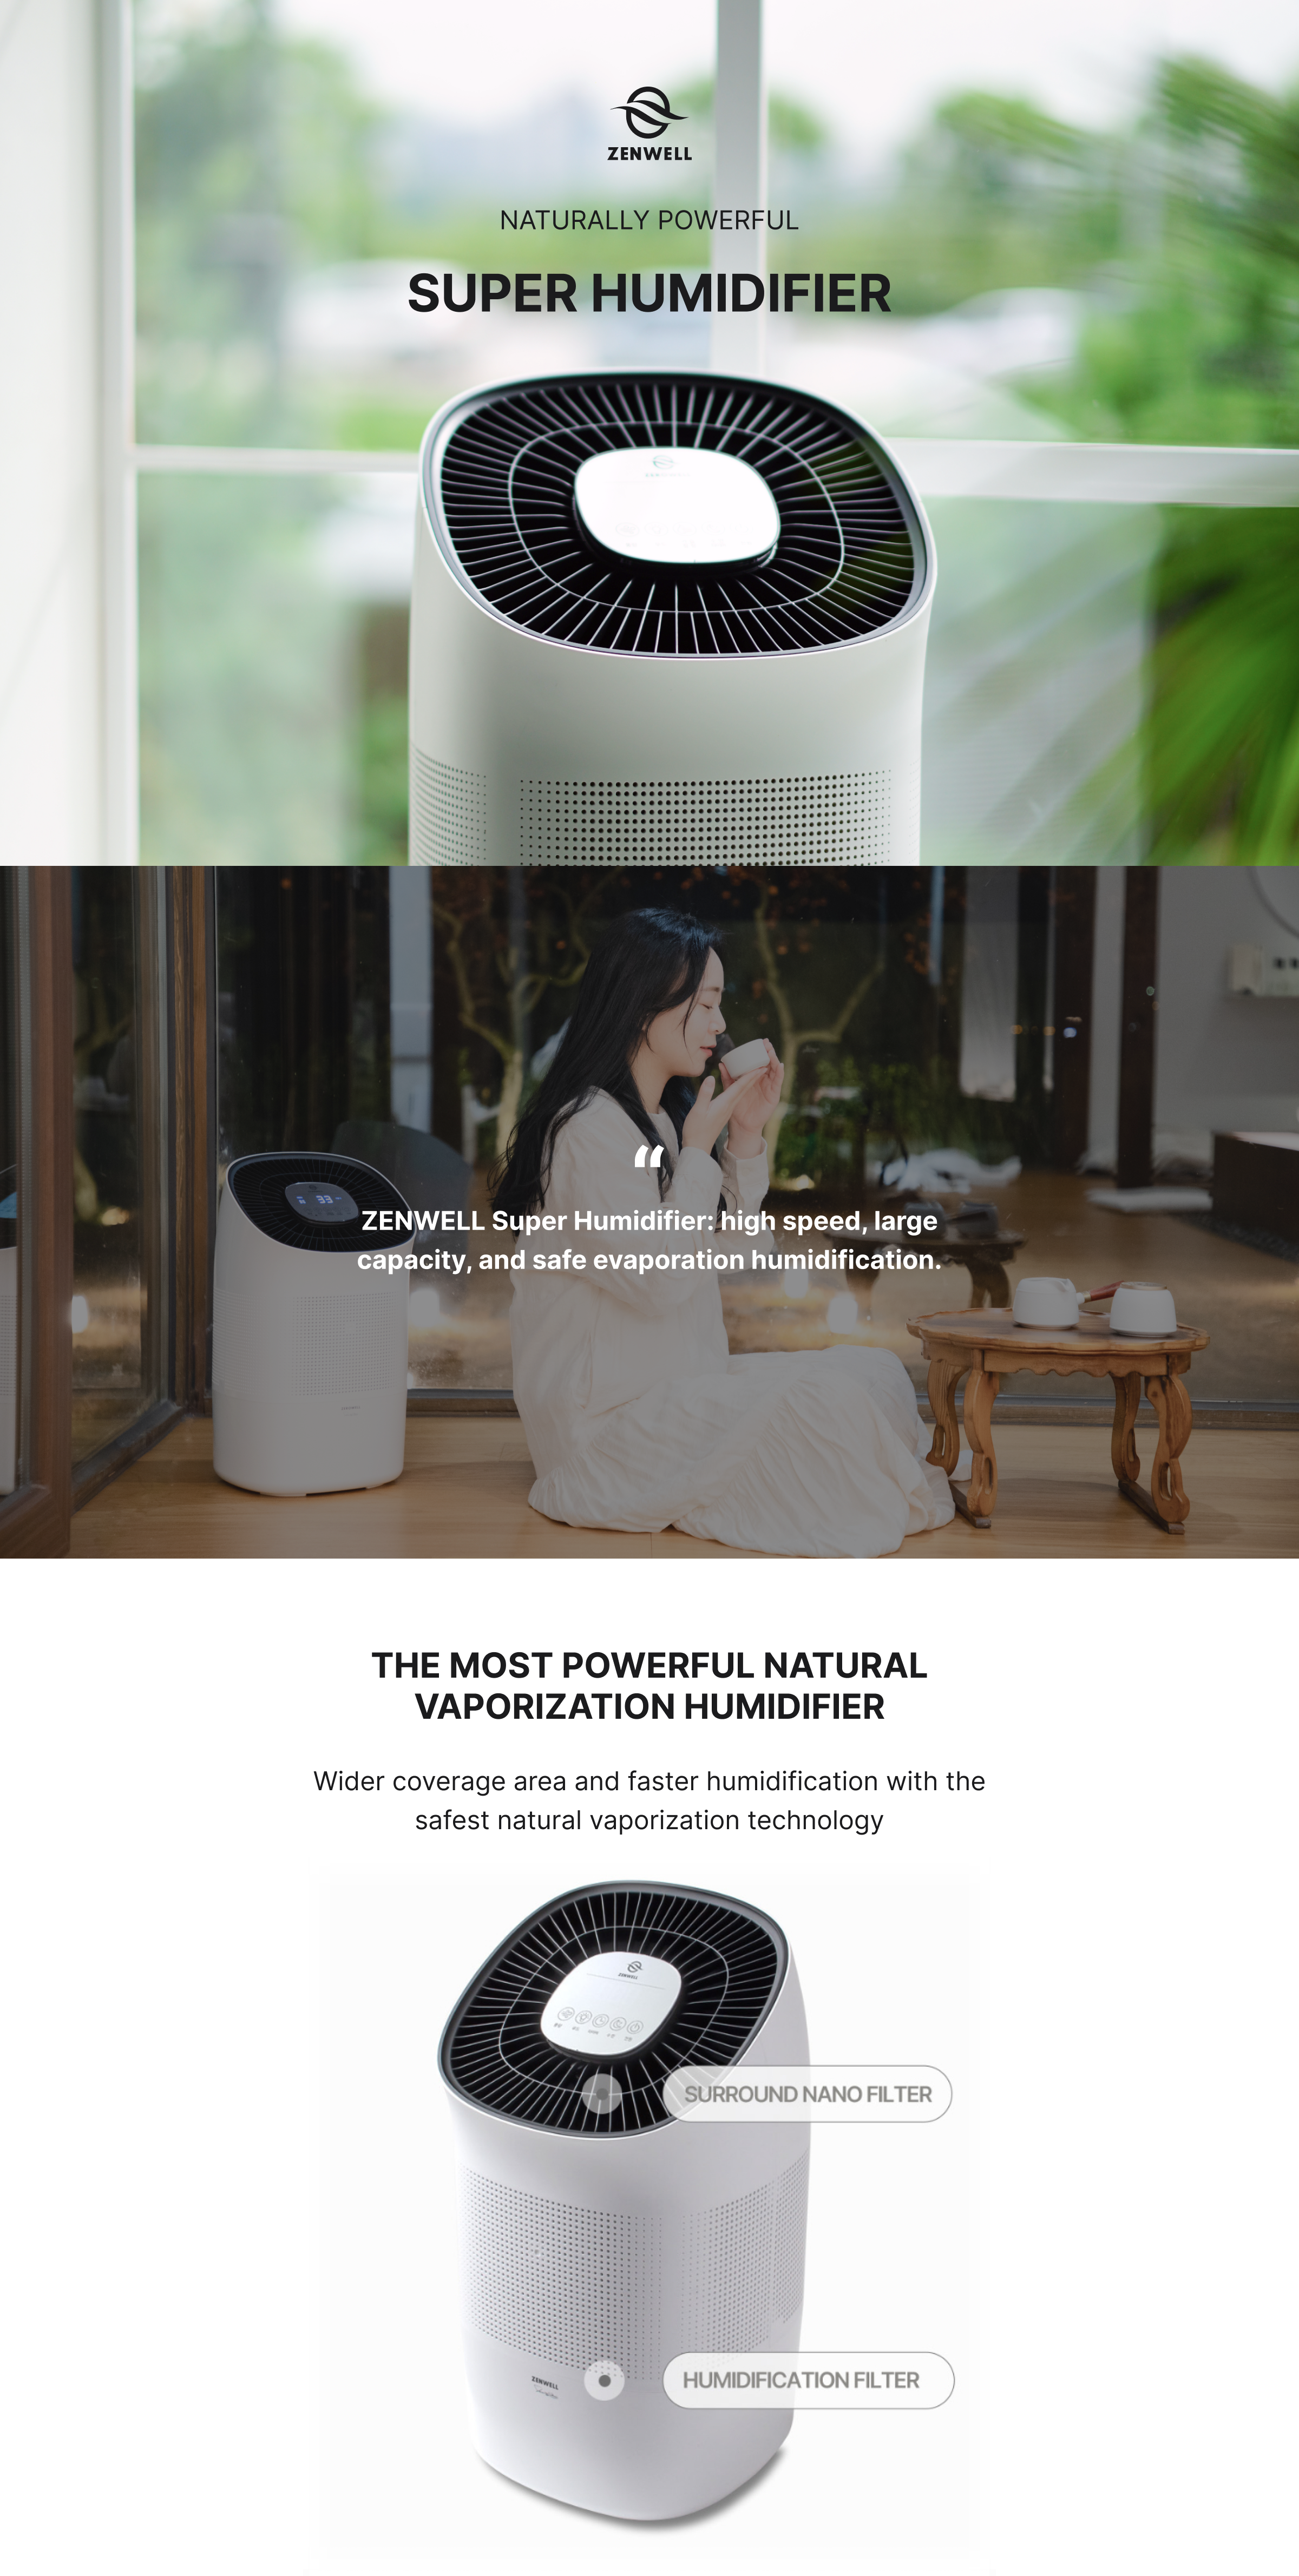 Super Humidifier product description image highlighting the high speed, large capacity, and safe evaporation humidification with a surround nano and humidifier filter. 